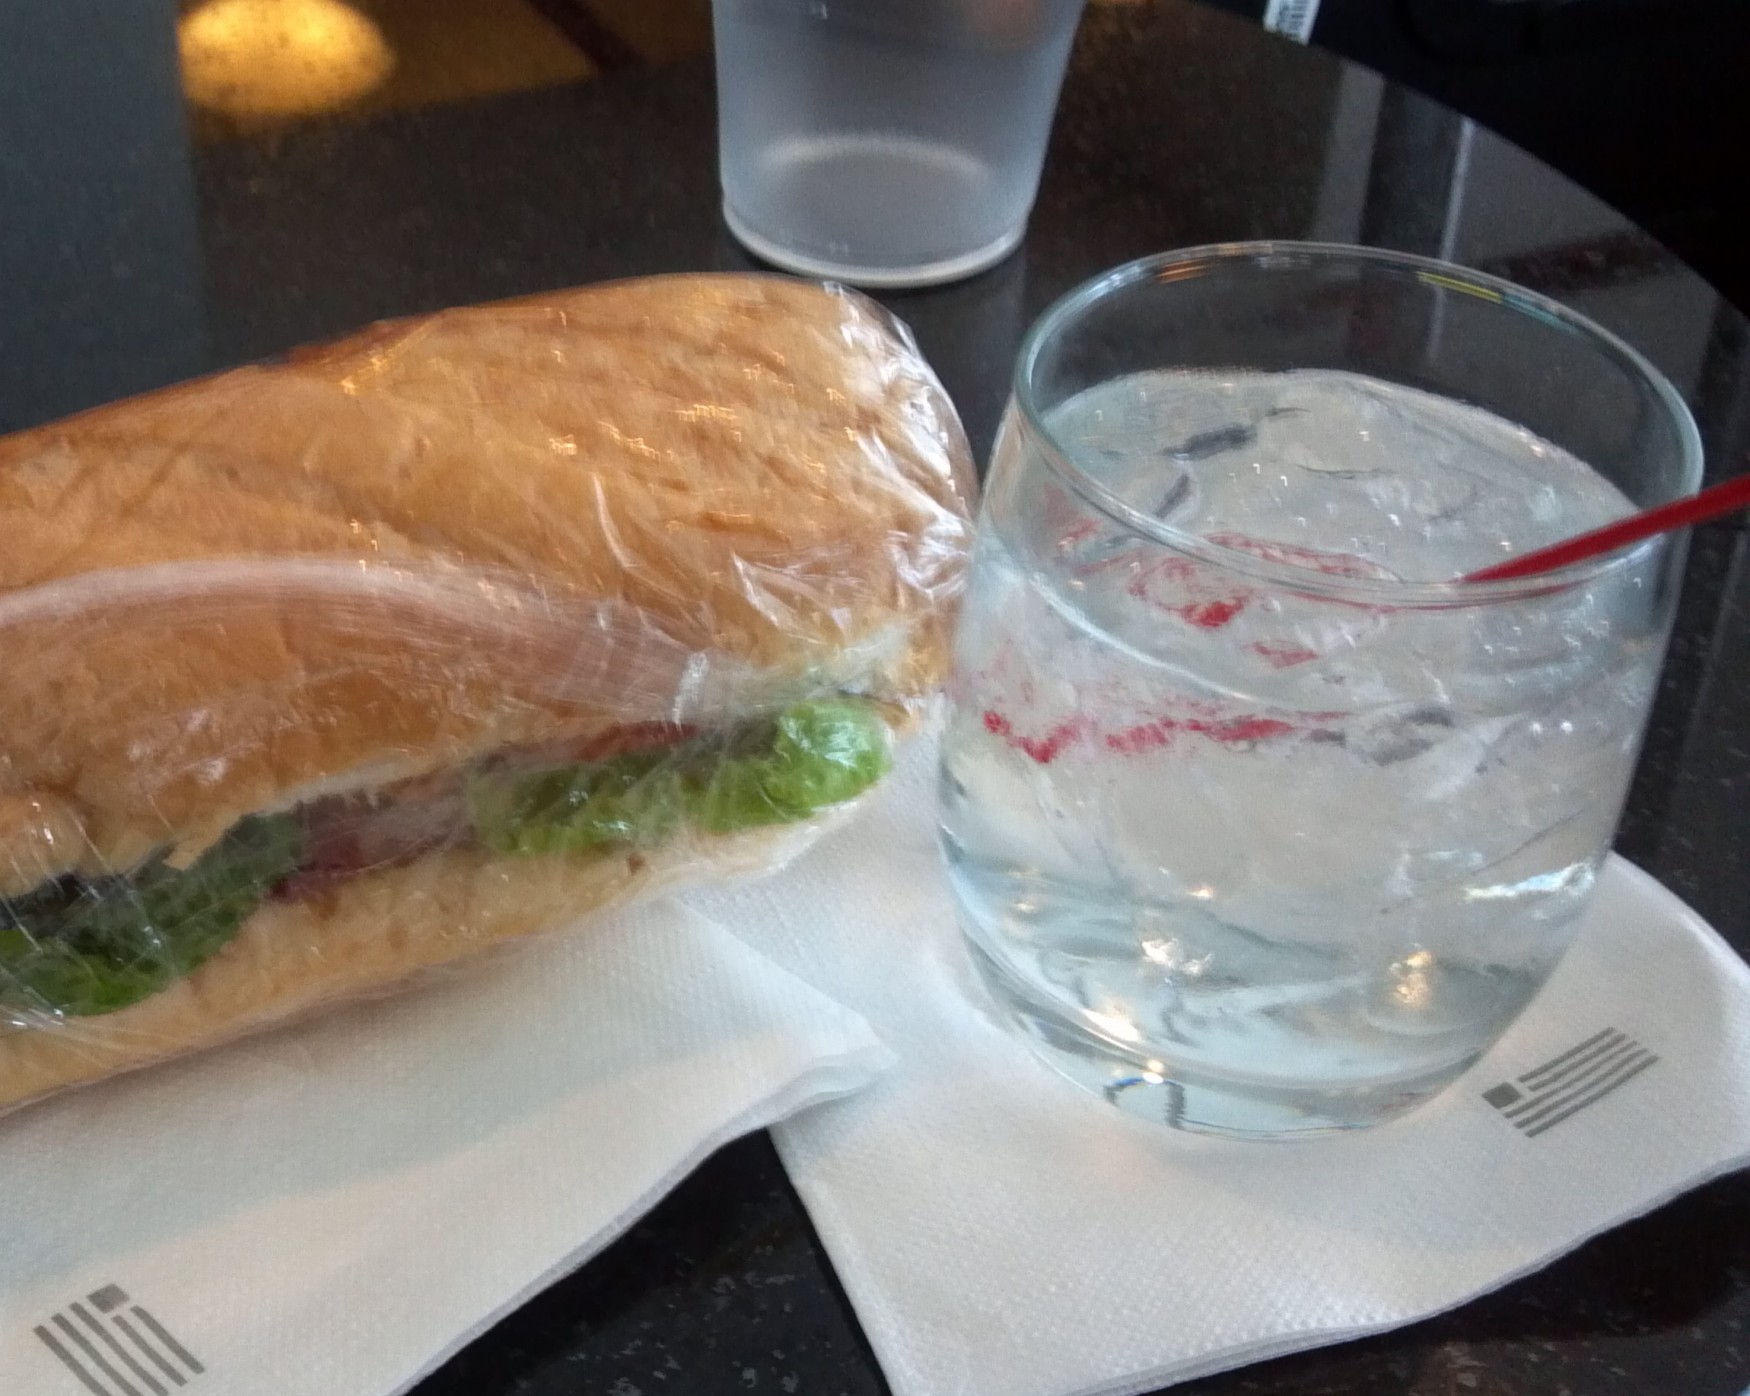 a sandwich and a glass of water